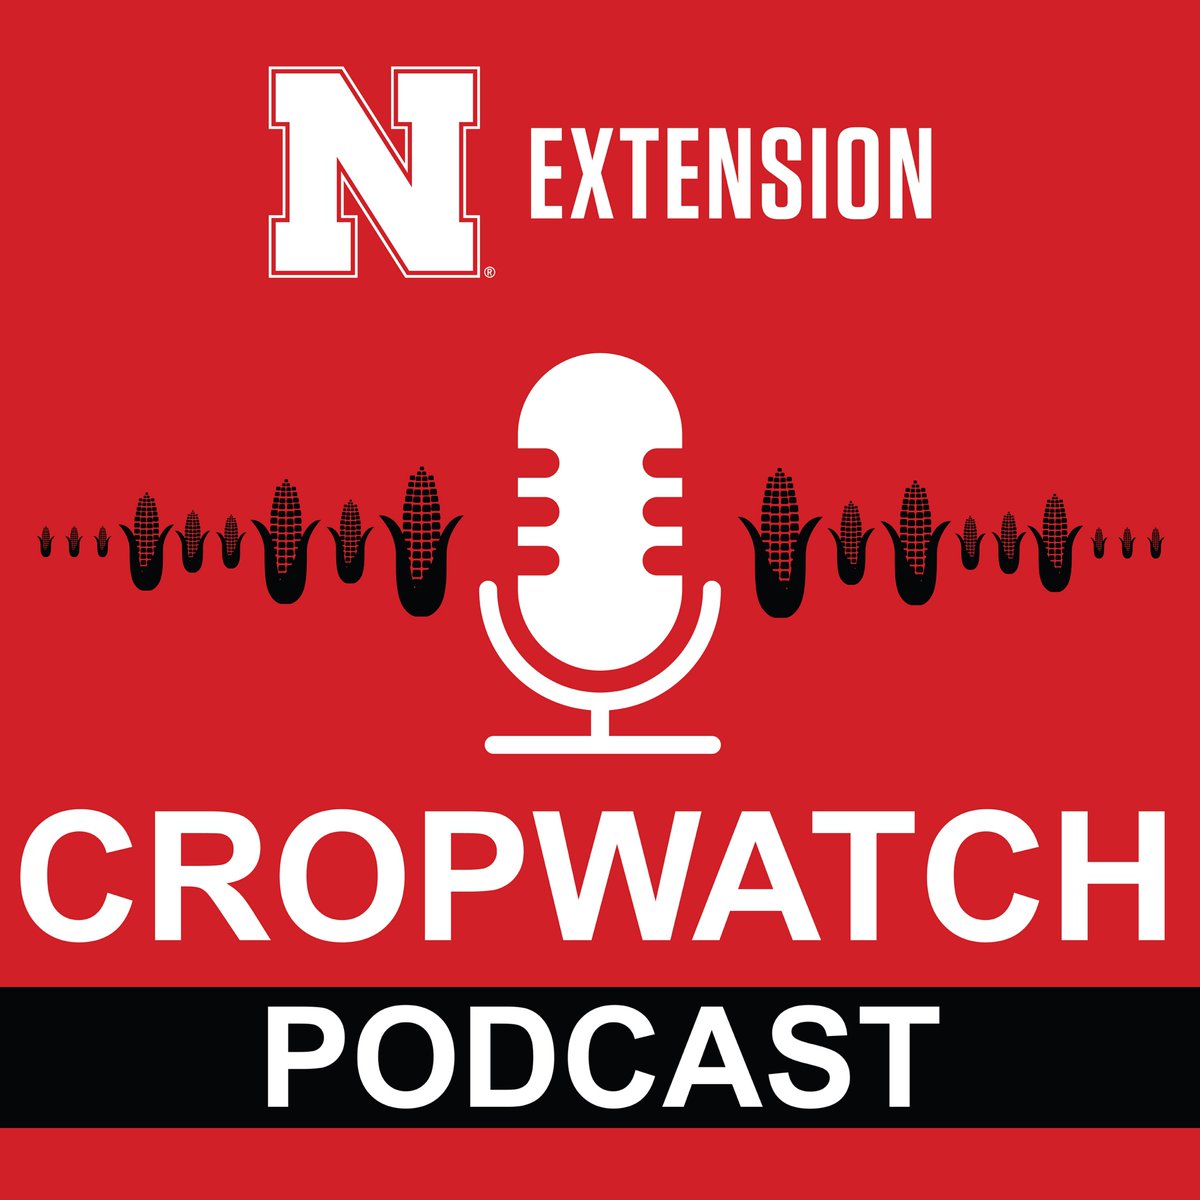 CropWatch Podcast Episode #119 | In this episode, our host Eric Hunt chats with Bryce Anderson, DTN ag meteorologist, about the #weather outlook for the 2024 growing season. Listen here » ow.ly/PyhR50RweWs #NebExt #newx #wx #ag #plant2024 #plant24